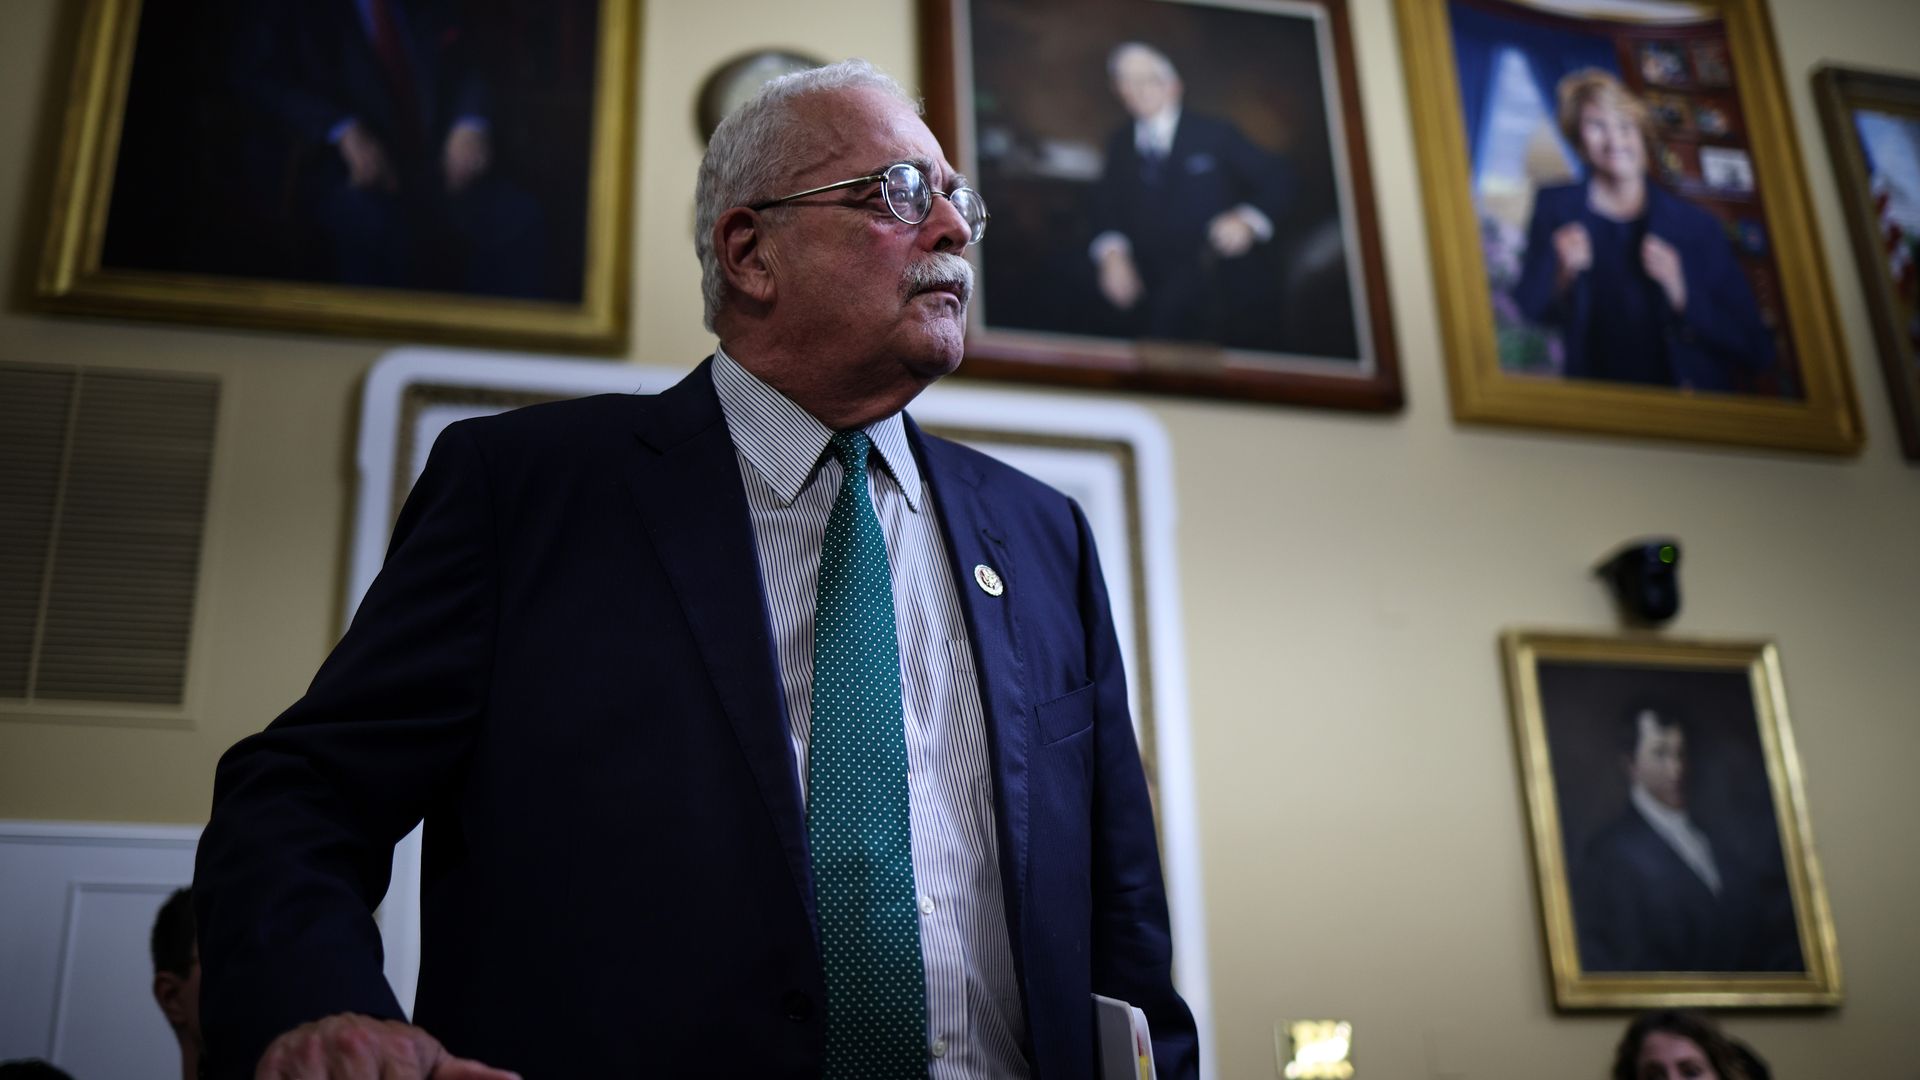 Rep. Gerry Connolly (D-VA) attends a House Rules Committee hearing on the procedures for upcoming votes at the U.S. Capitol on June 28, 2021